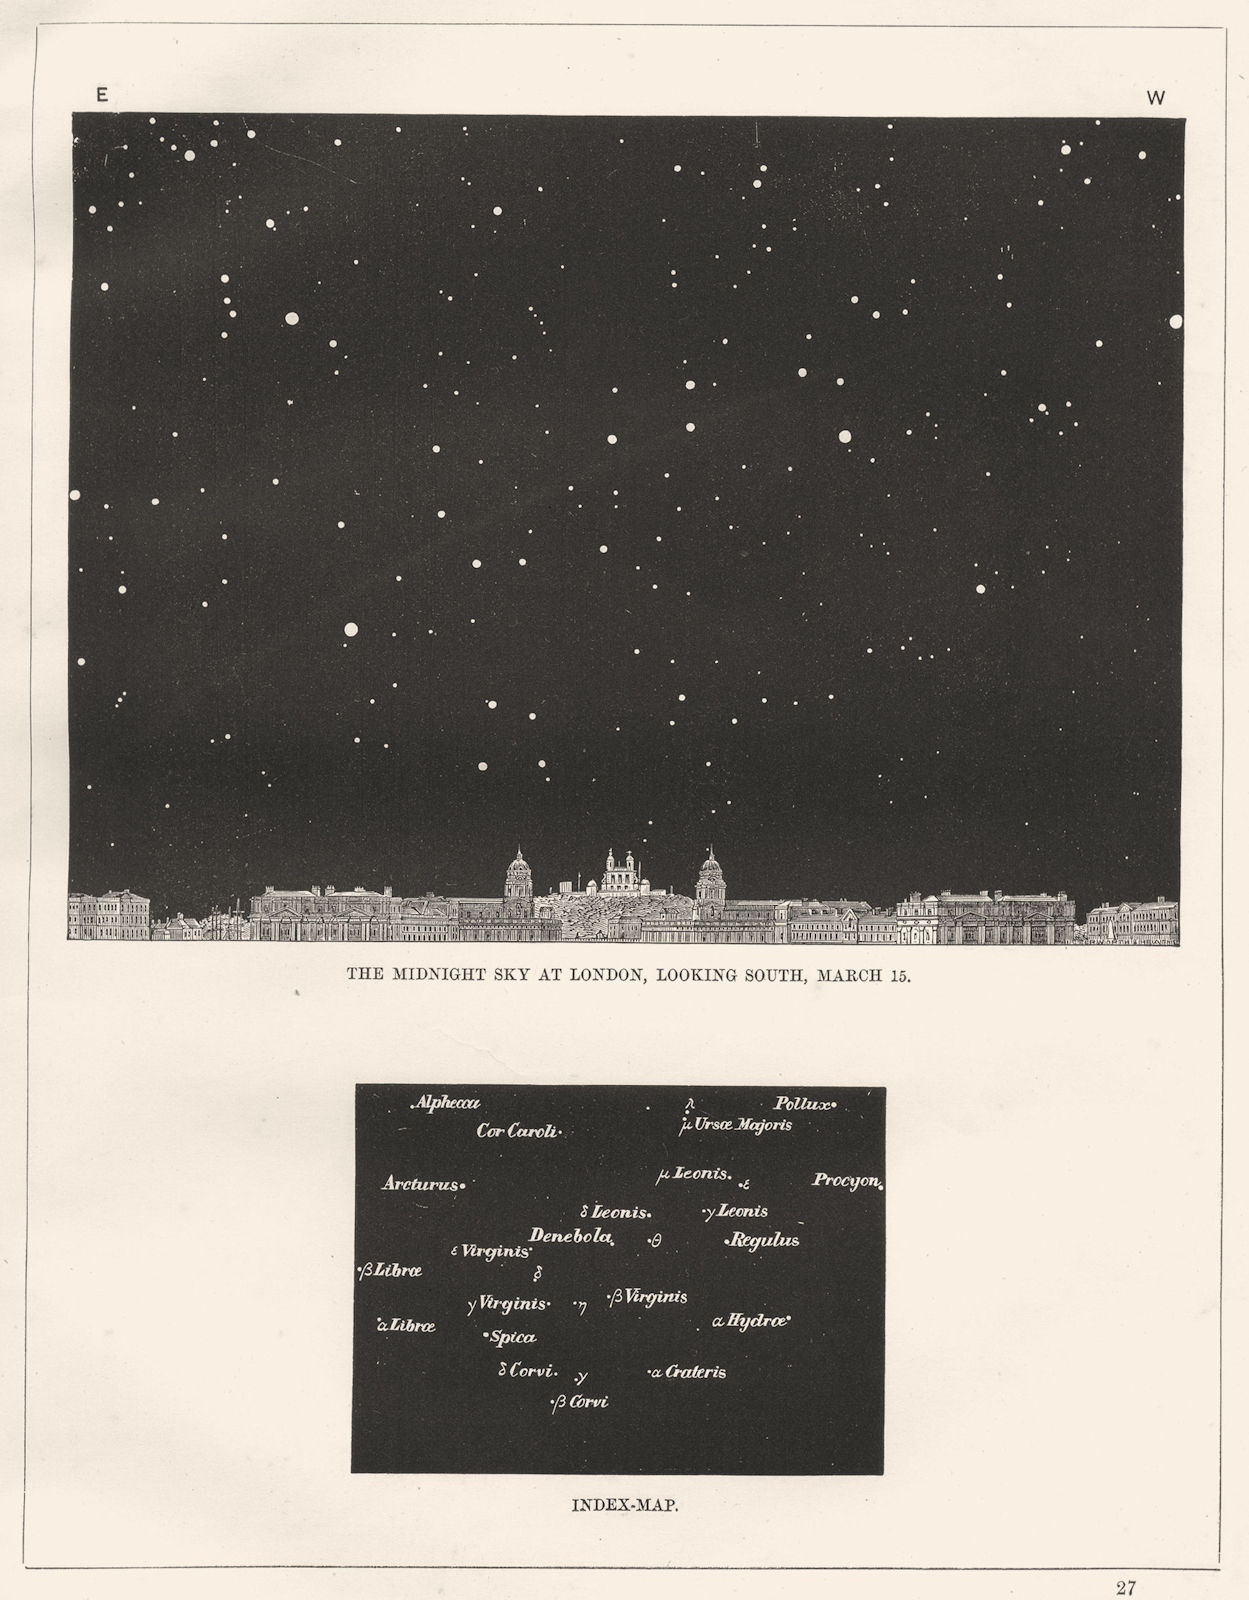 The Midnight Sky at London. Looking South, March 15. Greenwich 1869 old print